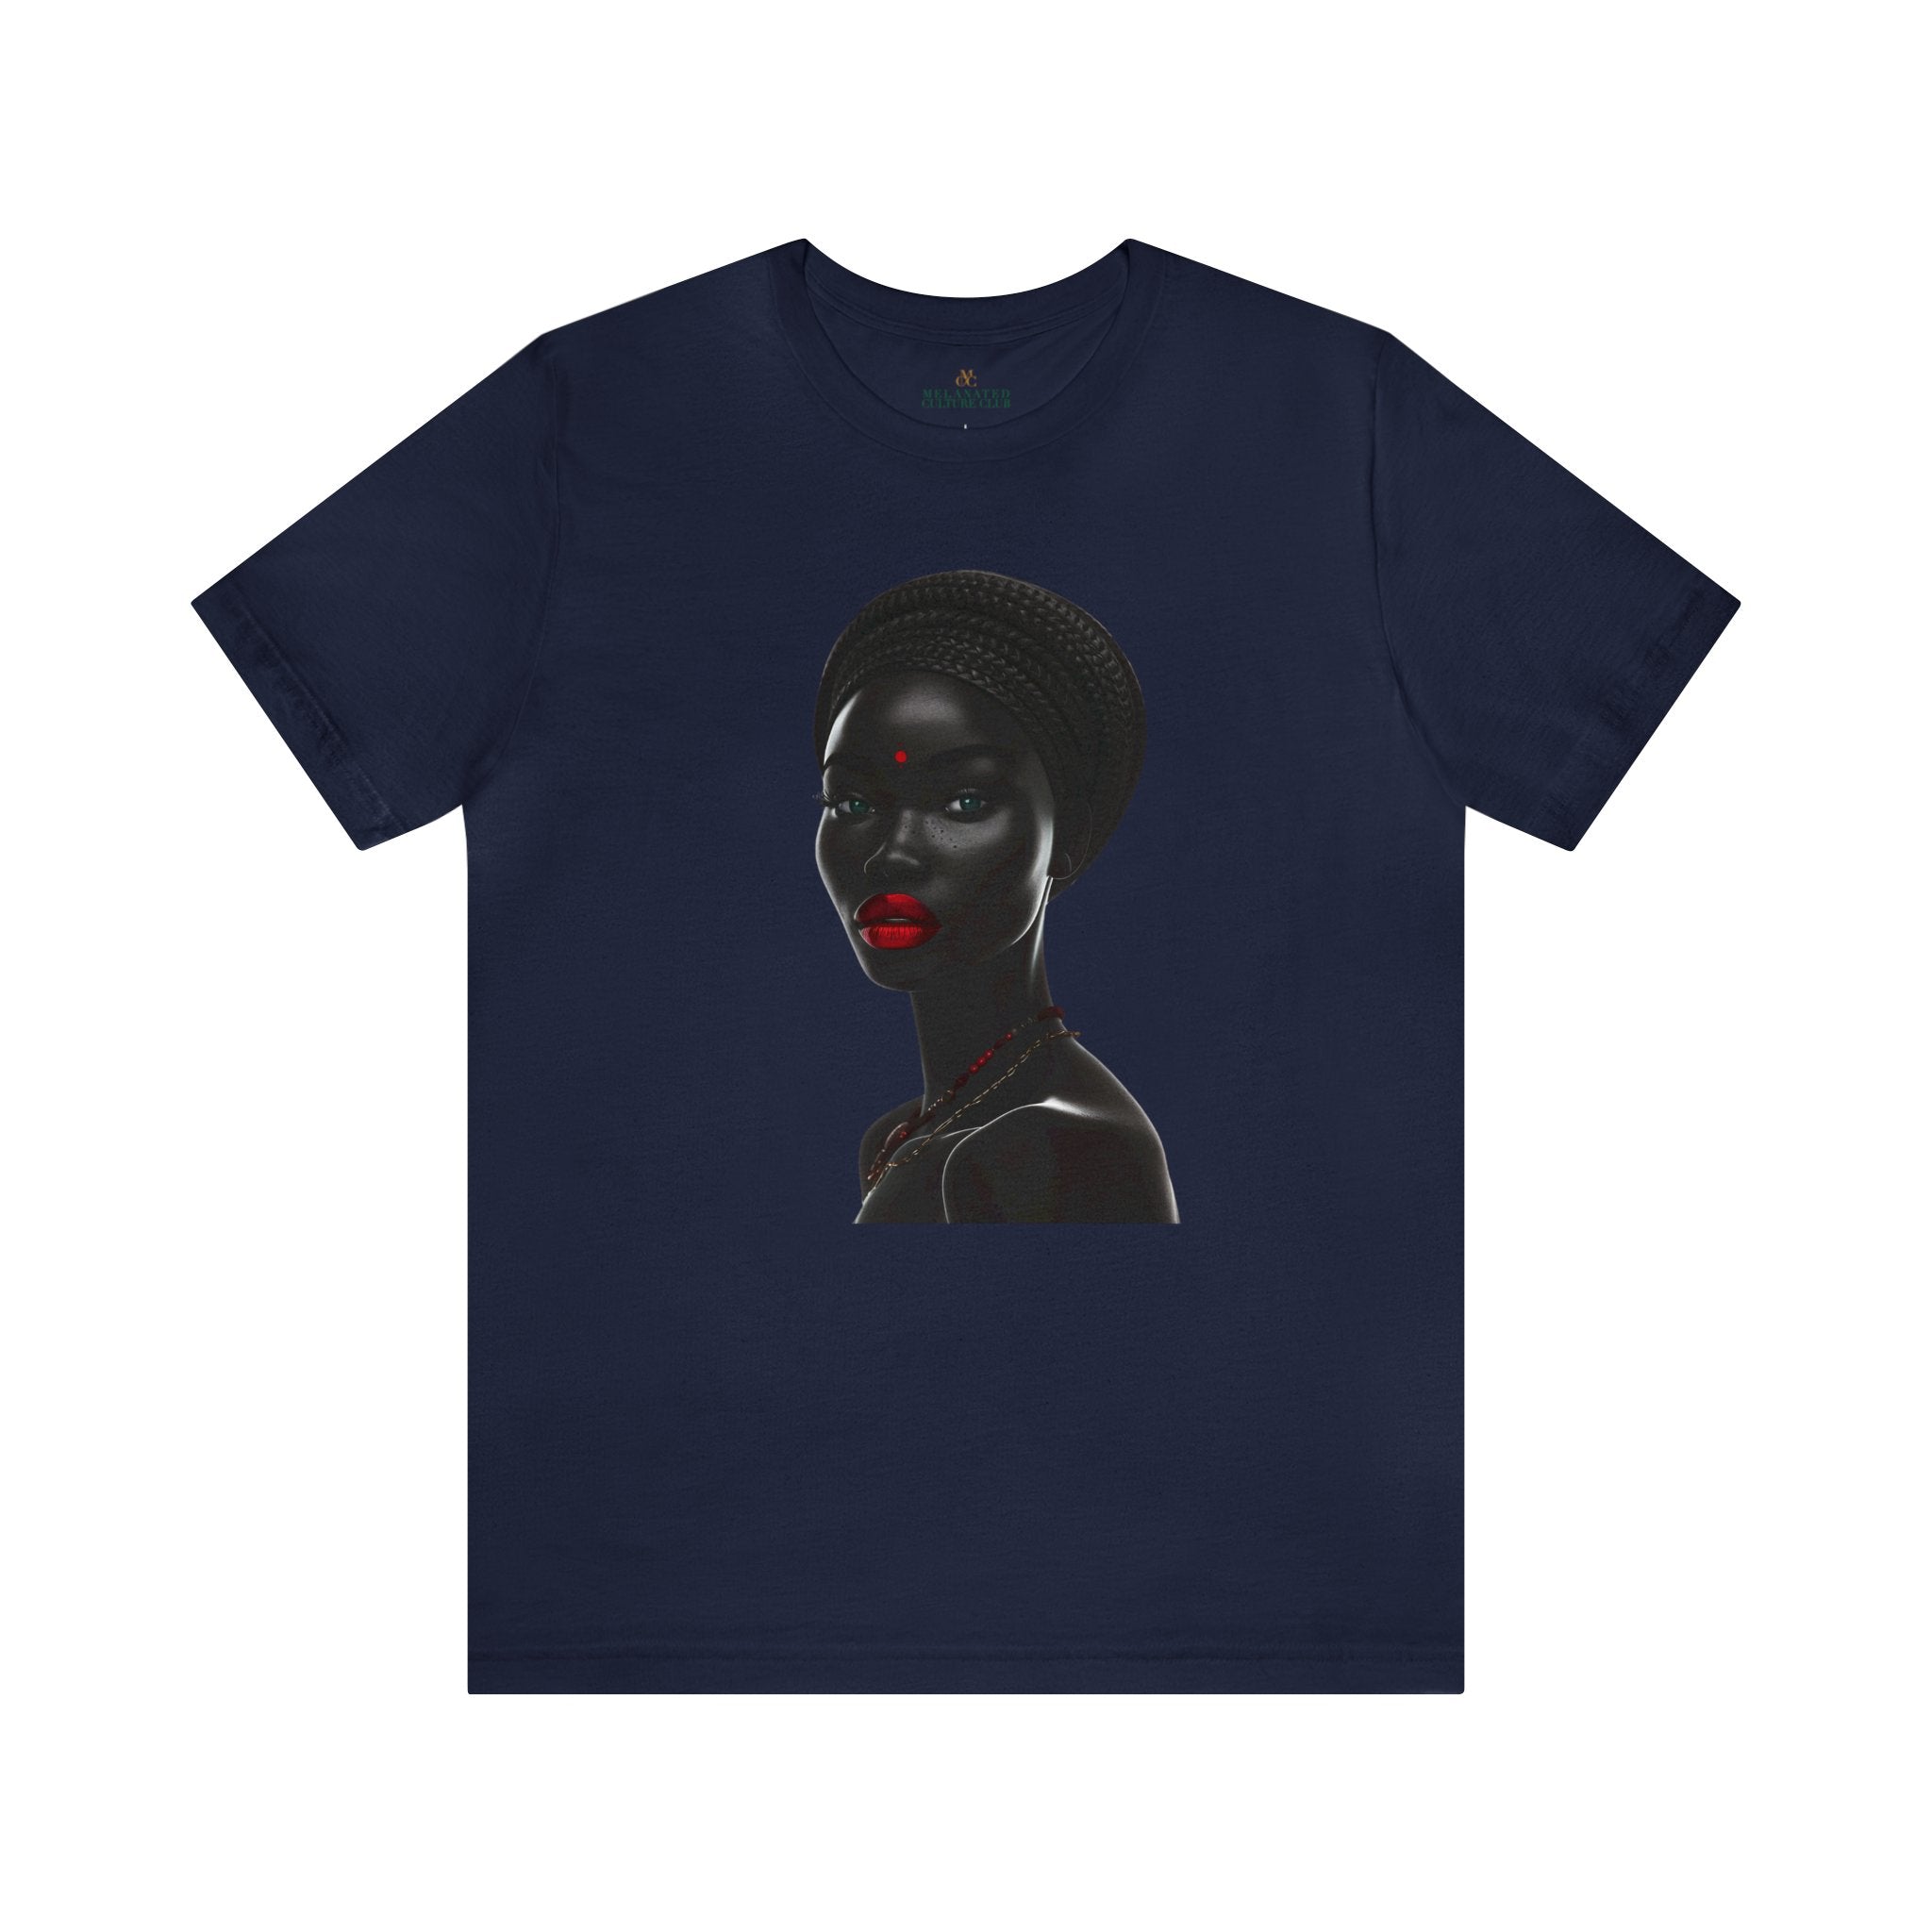 Afrocentric Black Beauty tee shirt in navy.